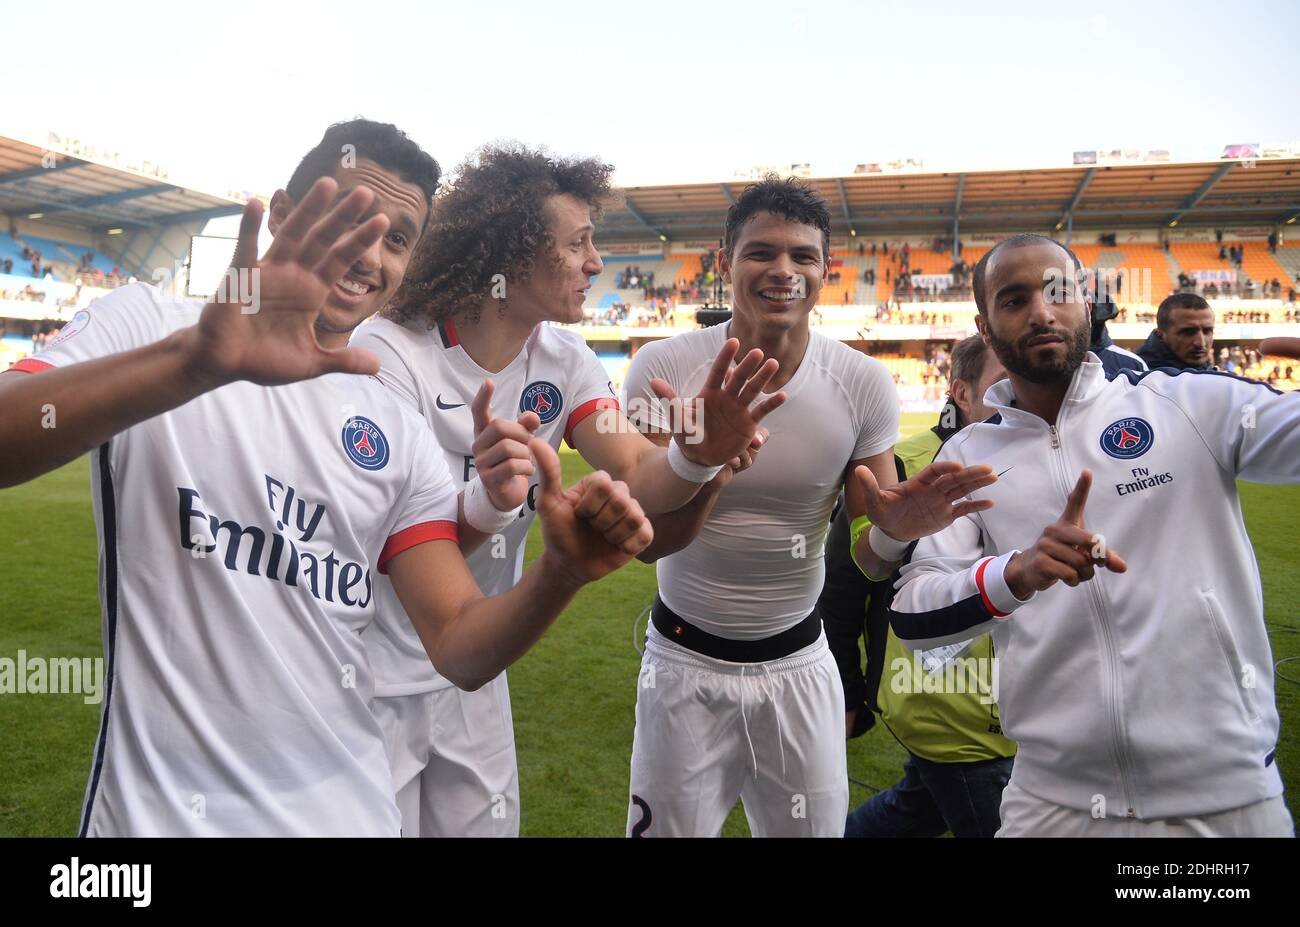 PSG's Marquinhos, David Luiz, Thiago Silva and Lucas Moura celebrate during the French First League Football match,Troyes vs. Paris Saint-Germain at the Aube Stadium in Troyes, France on on March 13, 2016. PSG won 9-0. Paris Saint-Germain clinched a fourth consecutive Ligue 1 title in record time on March 13 after defeating Troyes, obliterating a new French record for the quickest league victory with eight games to spare before the end of the L1 championships. Photo by Christian Liewig/ABACAPRESS.COM Stock Photo